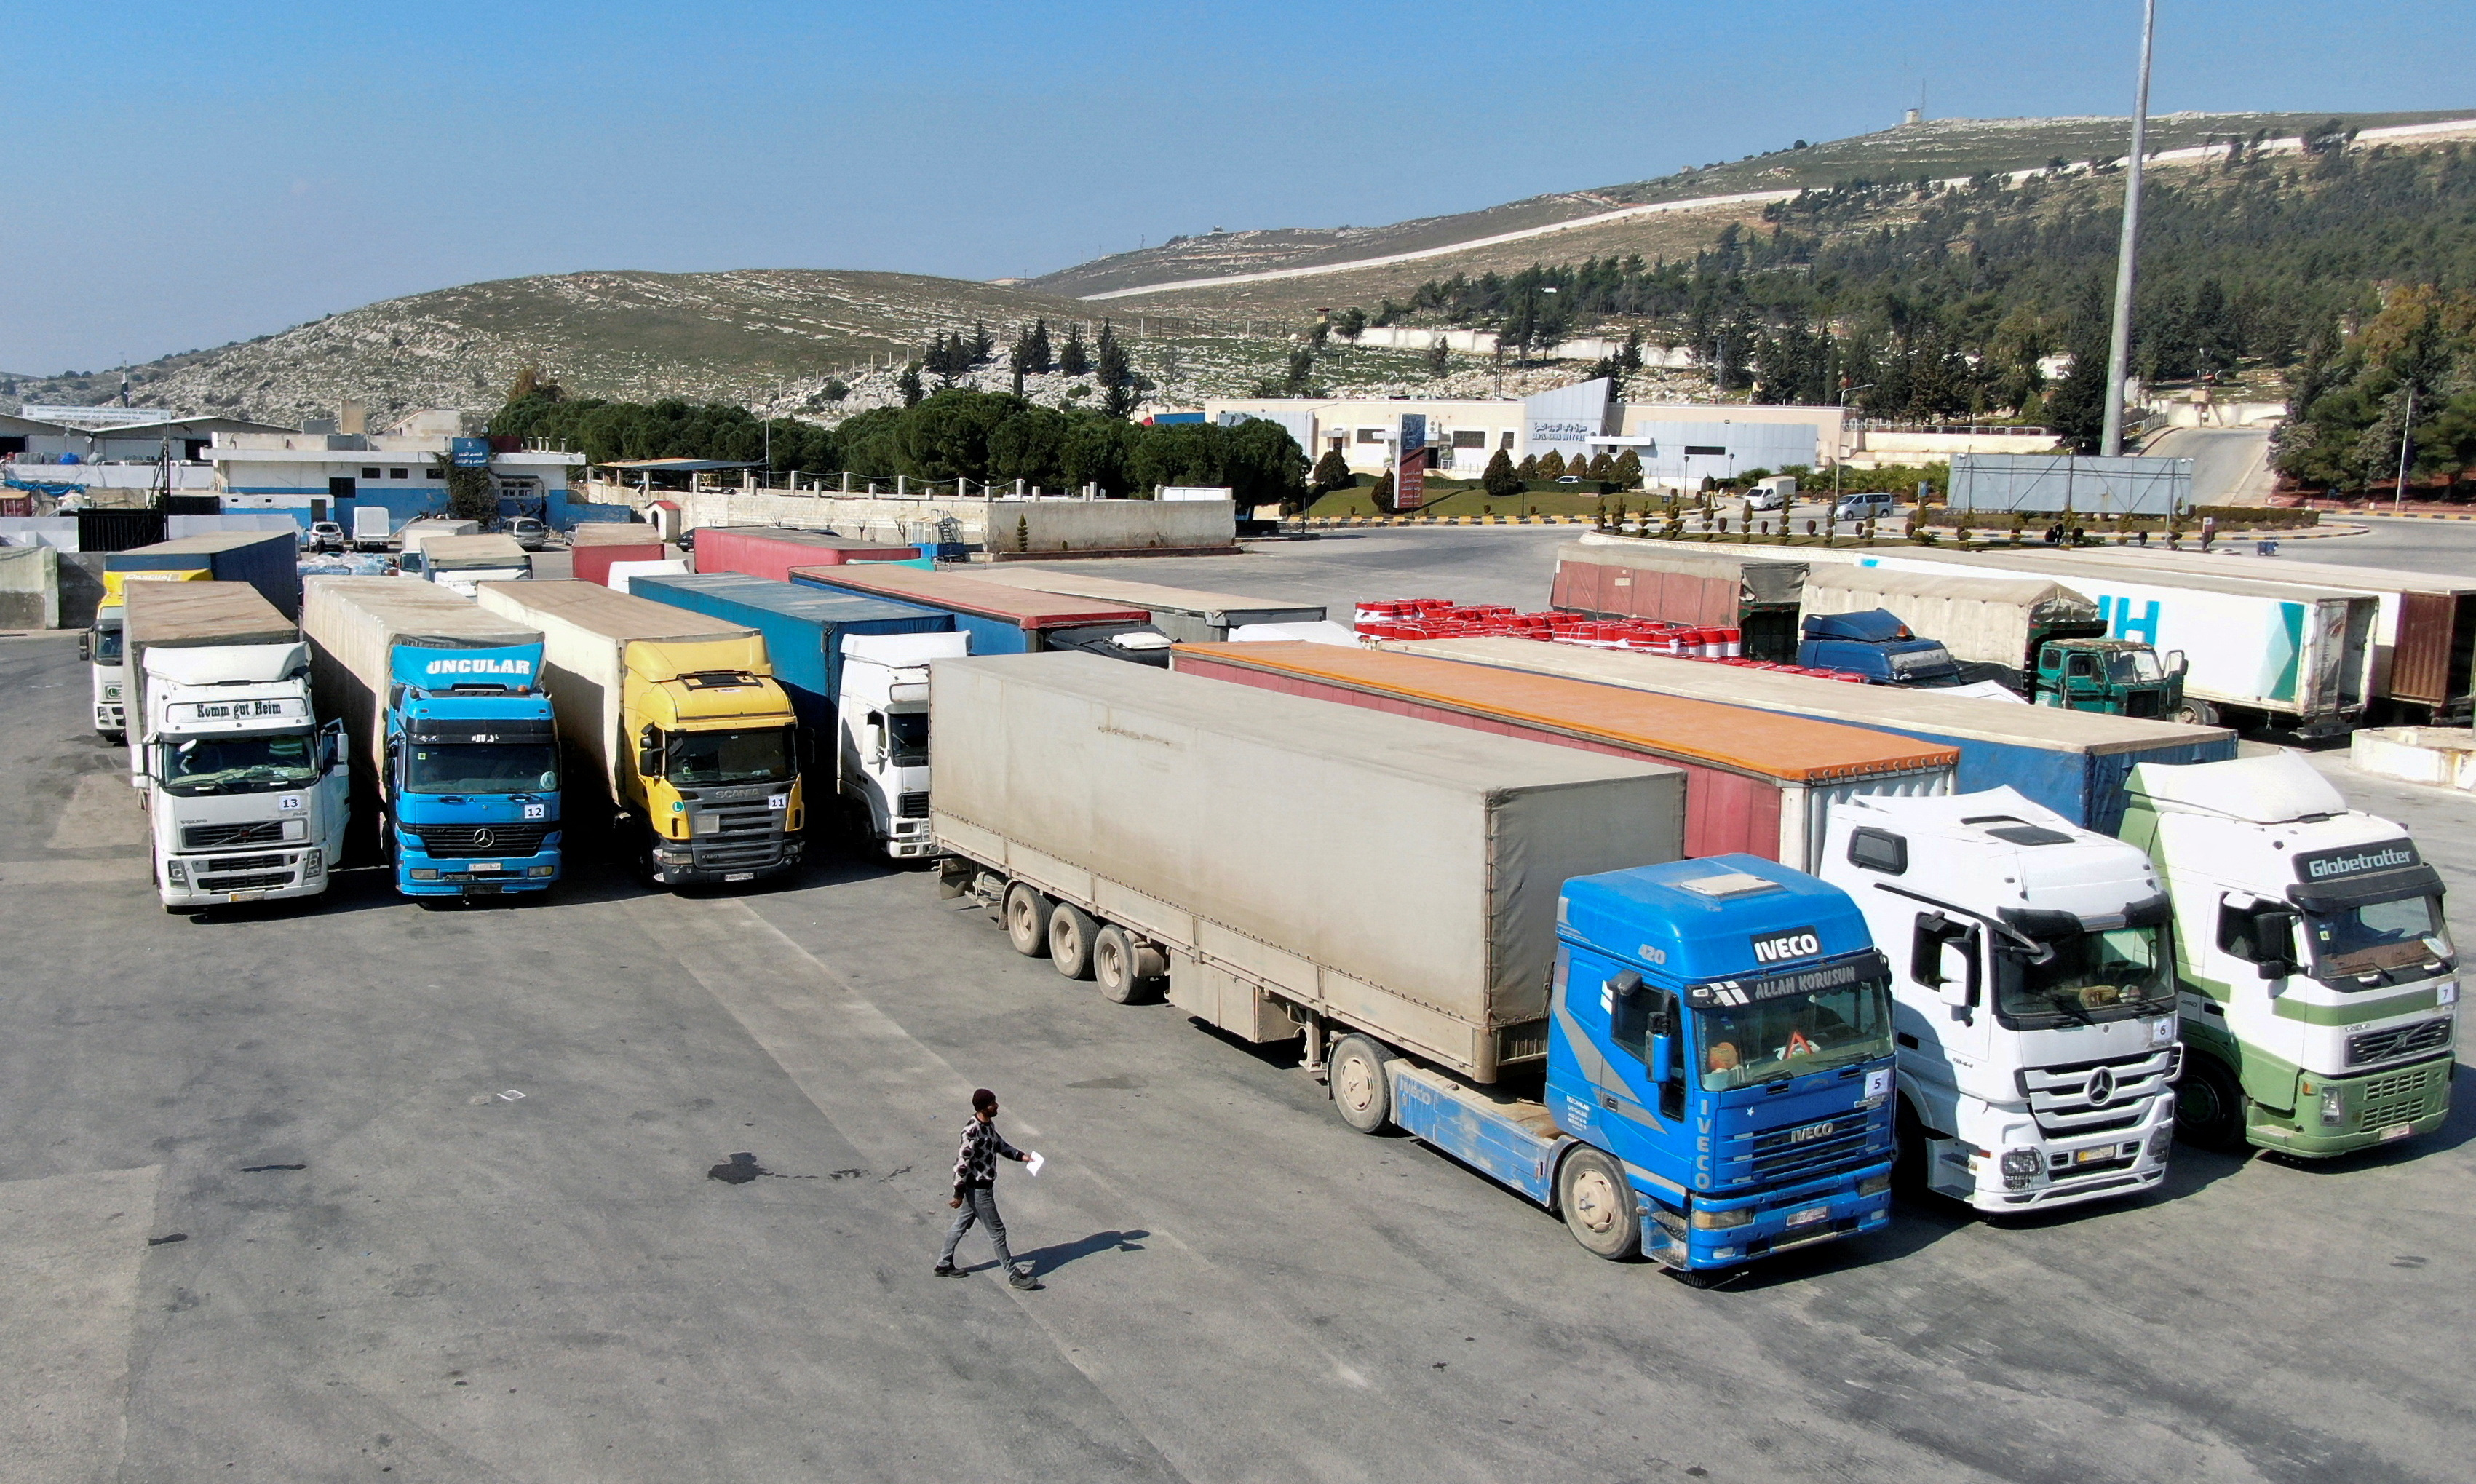 Trucks carrying aid from UN  World Food Programme (WFP) are parked at Bab al-Hawa crossing